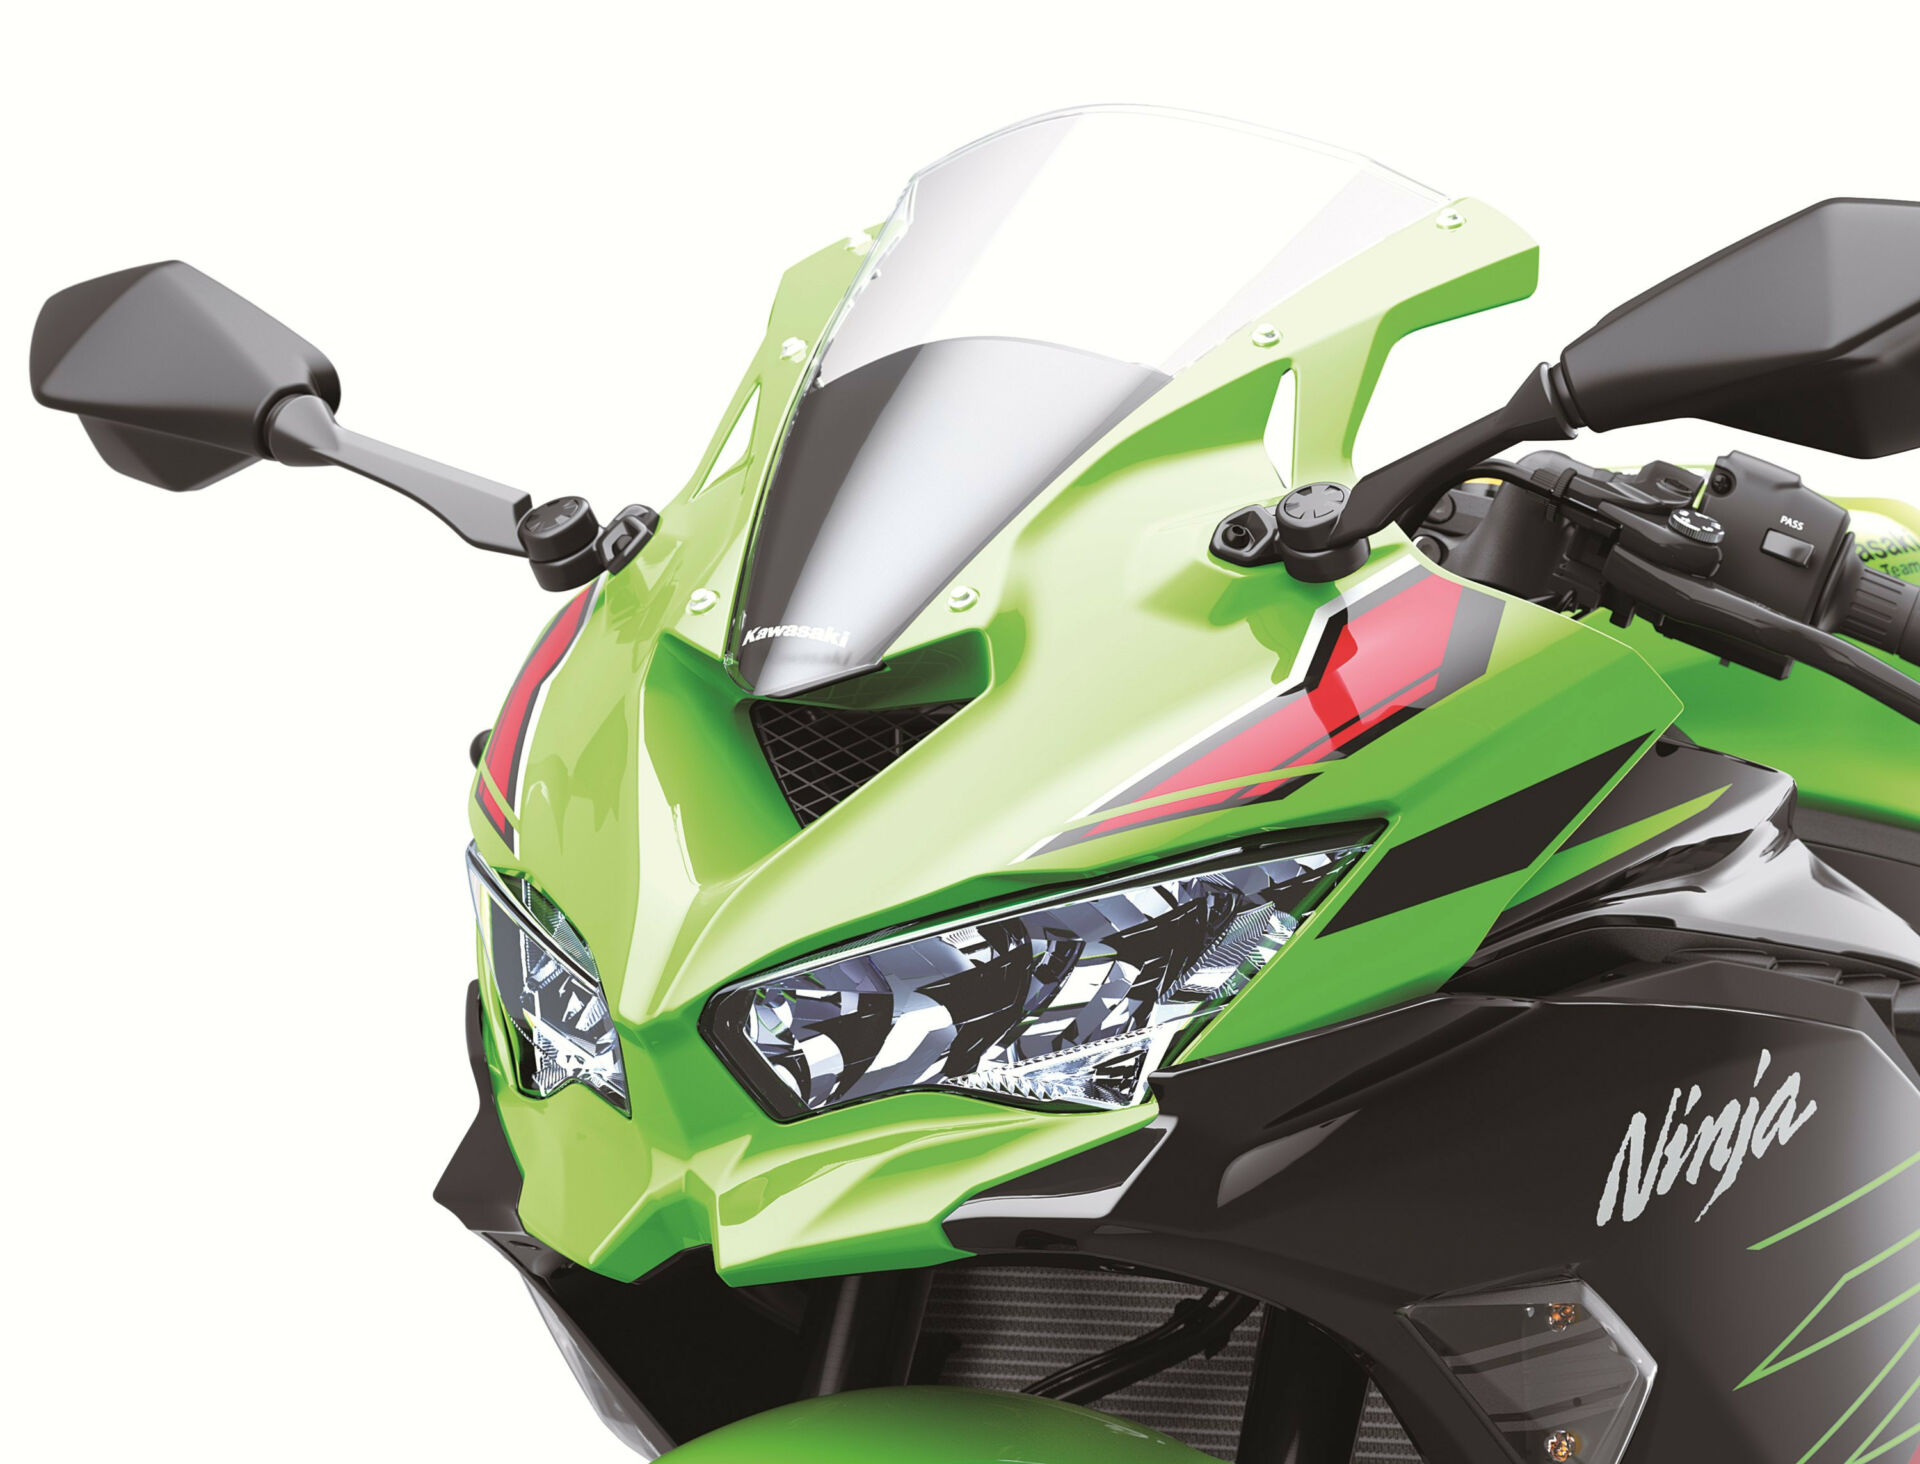 The Ninja ZX-4RR benefits from ram air induction - a first for the class. Photo courtesy Kawasaki.